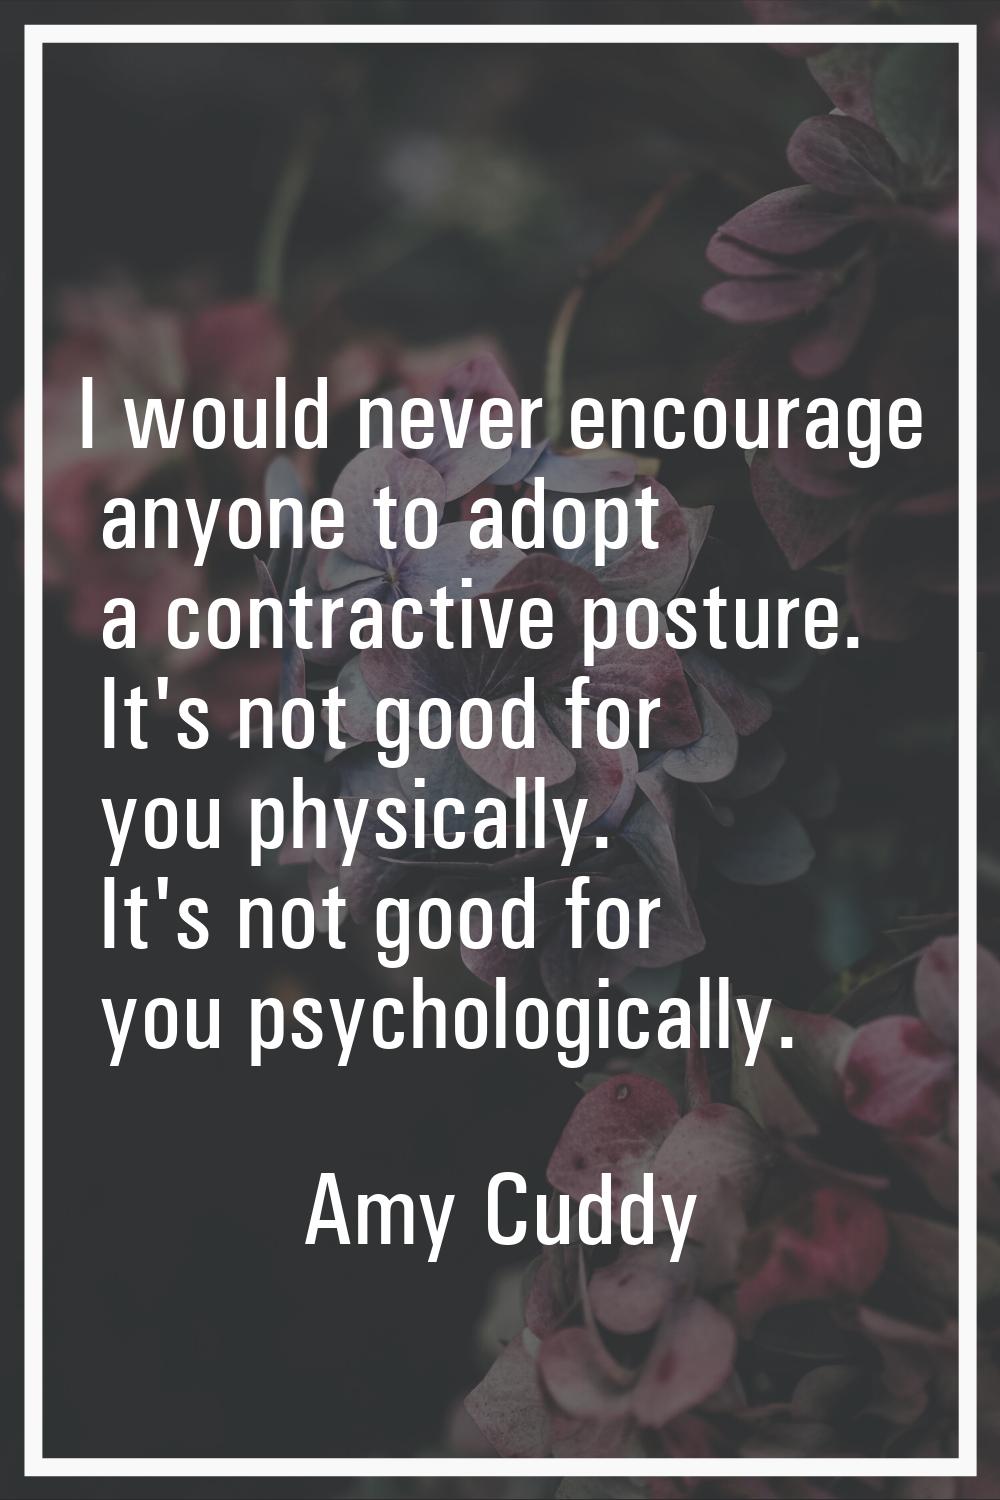 I would never encourage anyone to adopt a contractive posture. It's not good for you physically. It